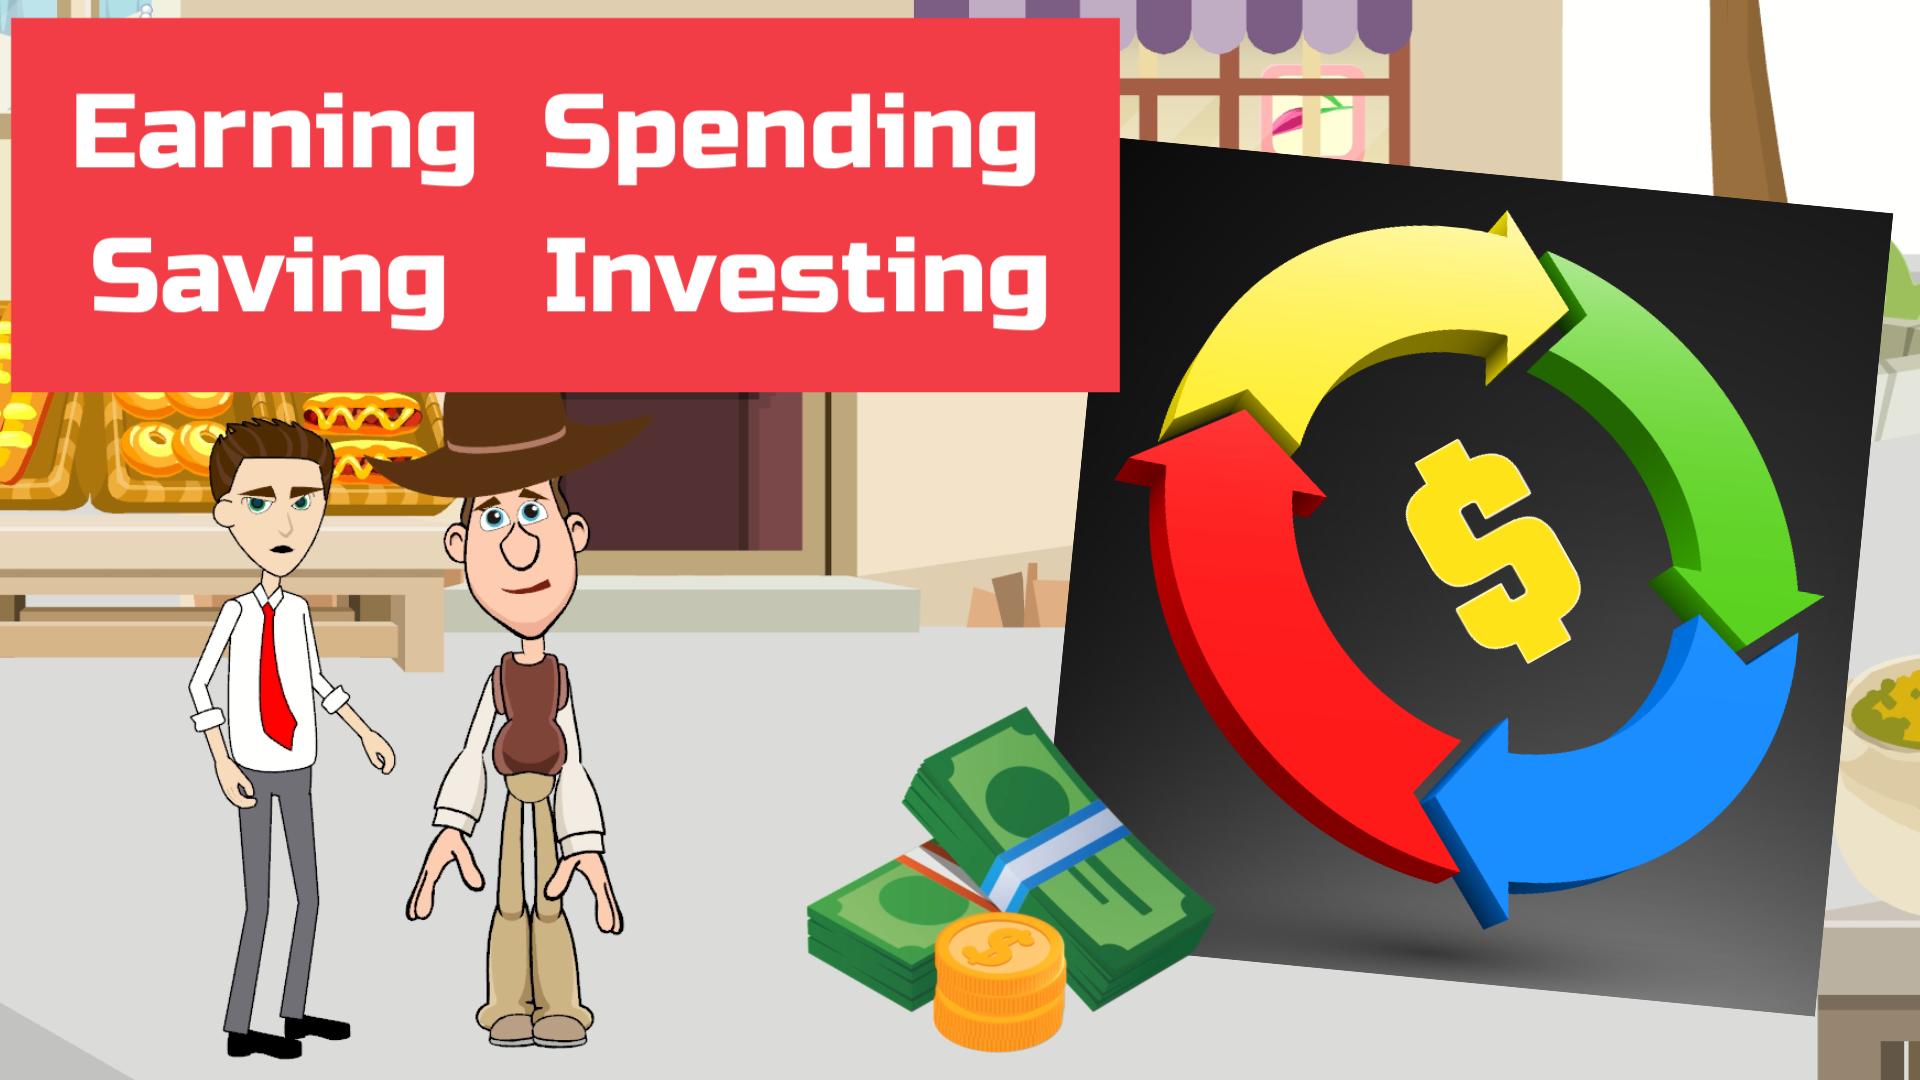 Earning Spending Saving and Investing